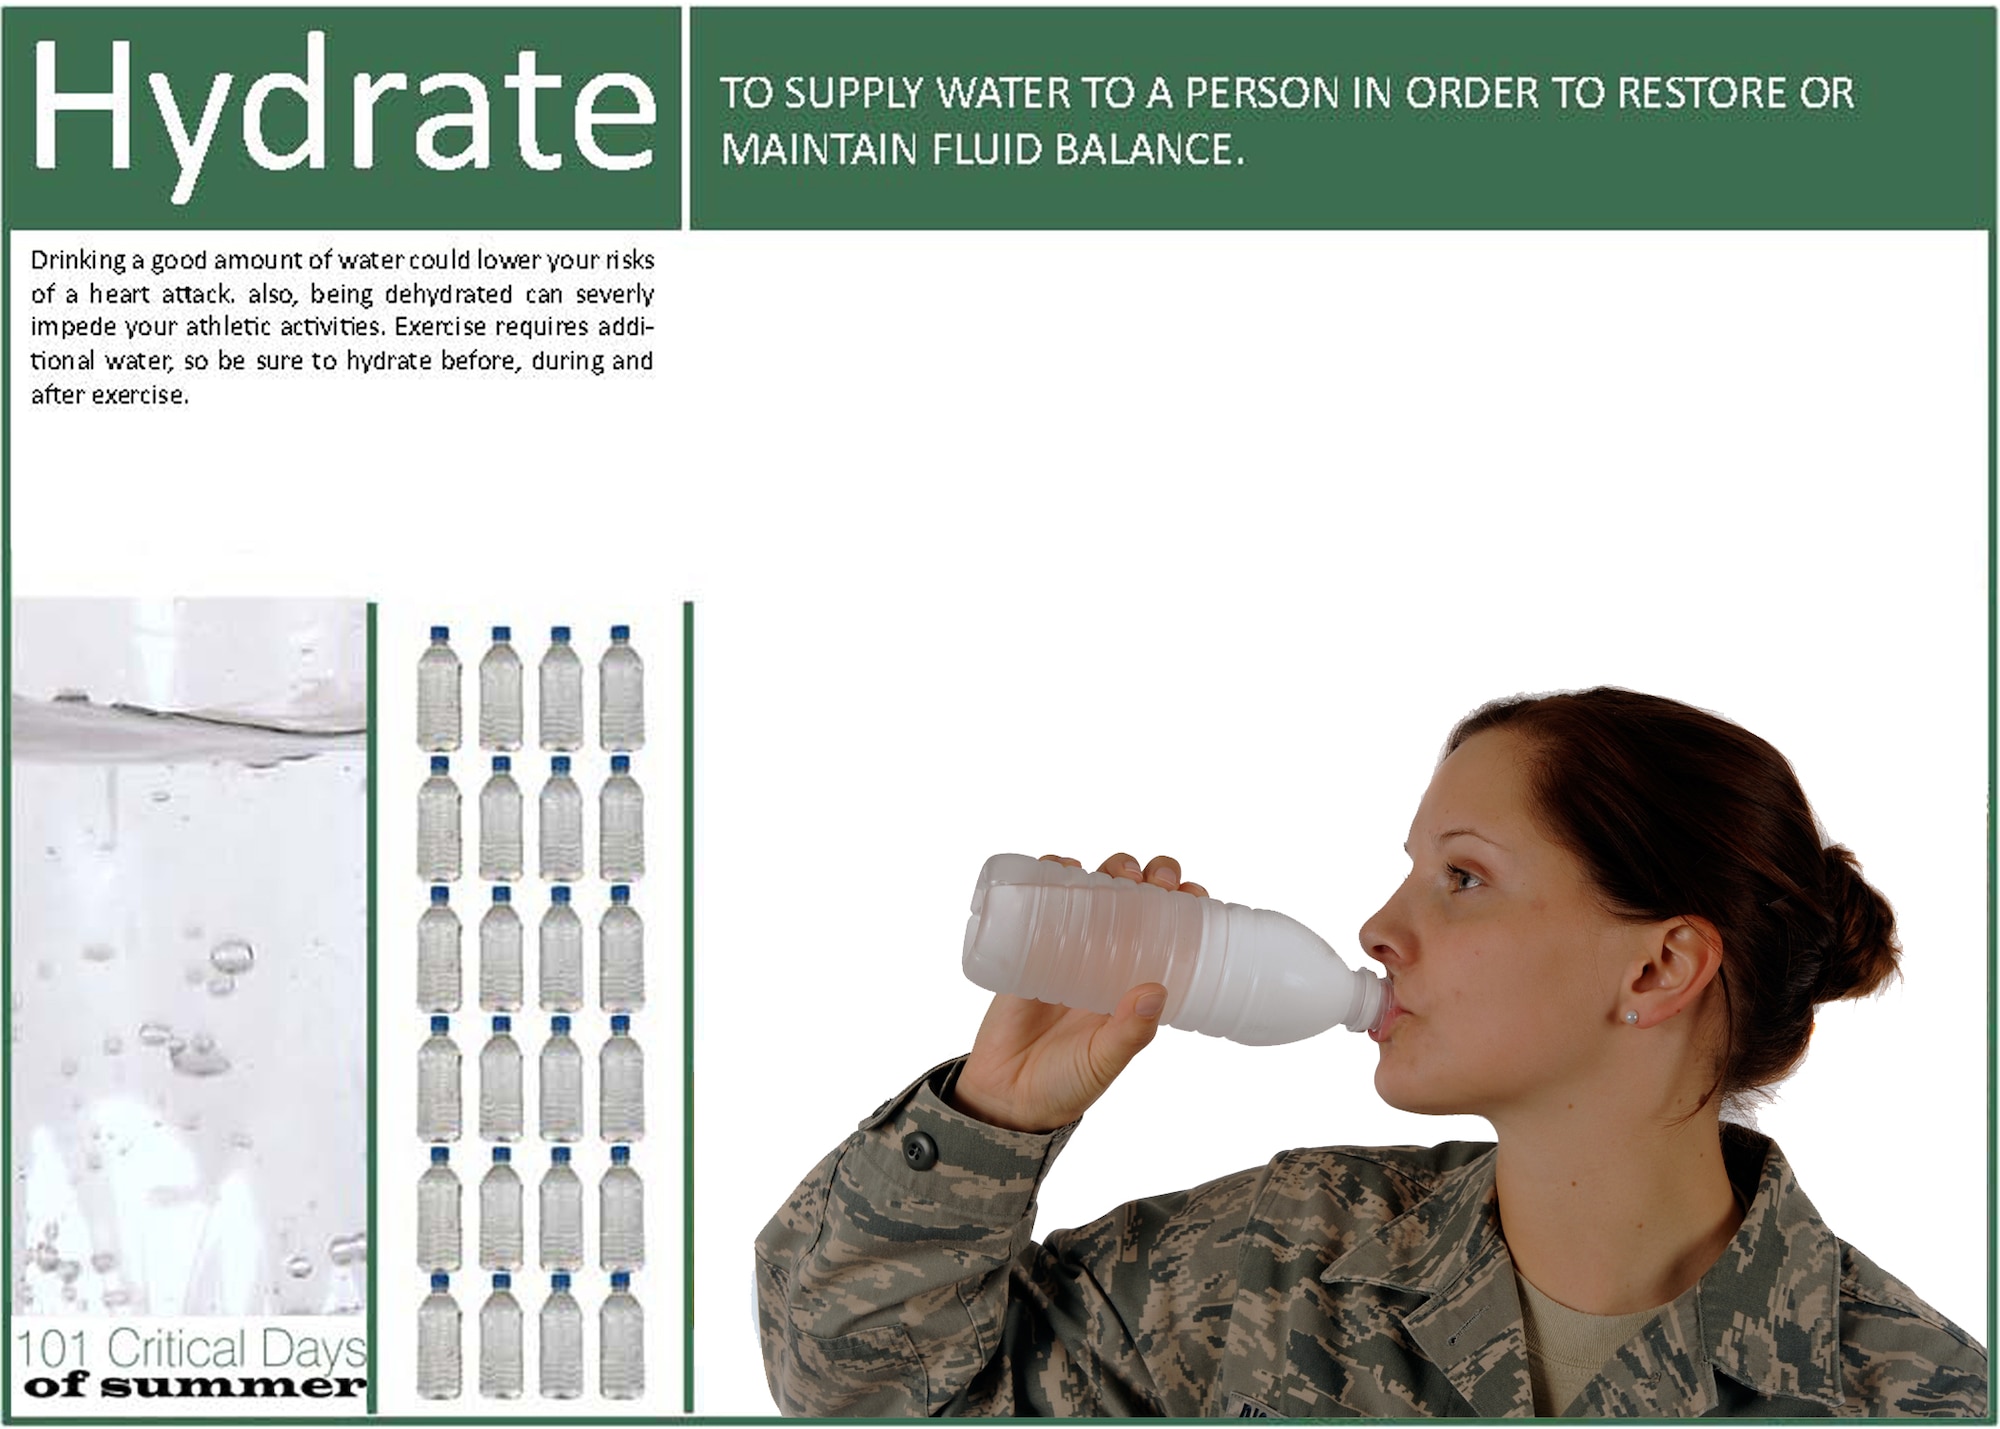 MOODY AIR FORCE BASE, Ga. -- 23rd Wing Airmen should remain hydrated during the hot summer months to maintain a proper fluid balance. (U.S. Air Force photo illustration by Airman 1st Class Brittany Barker)